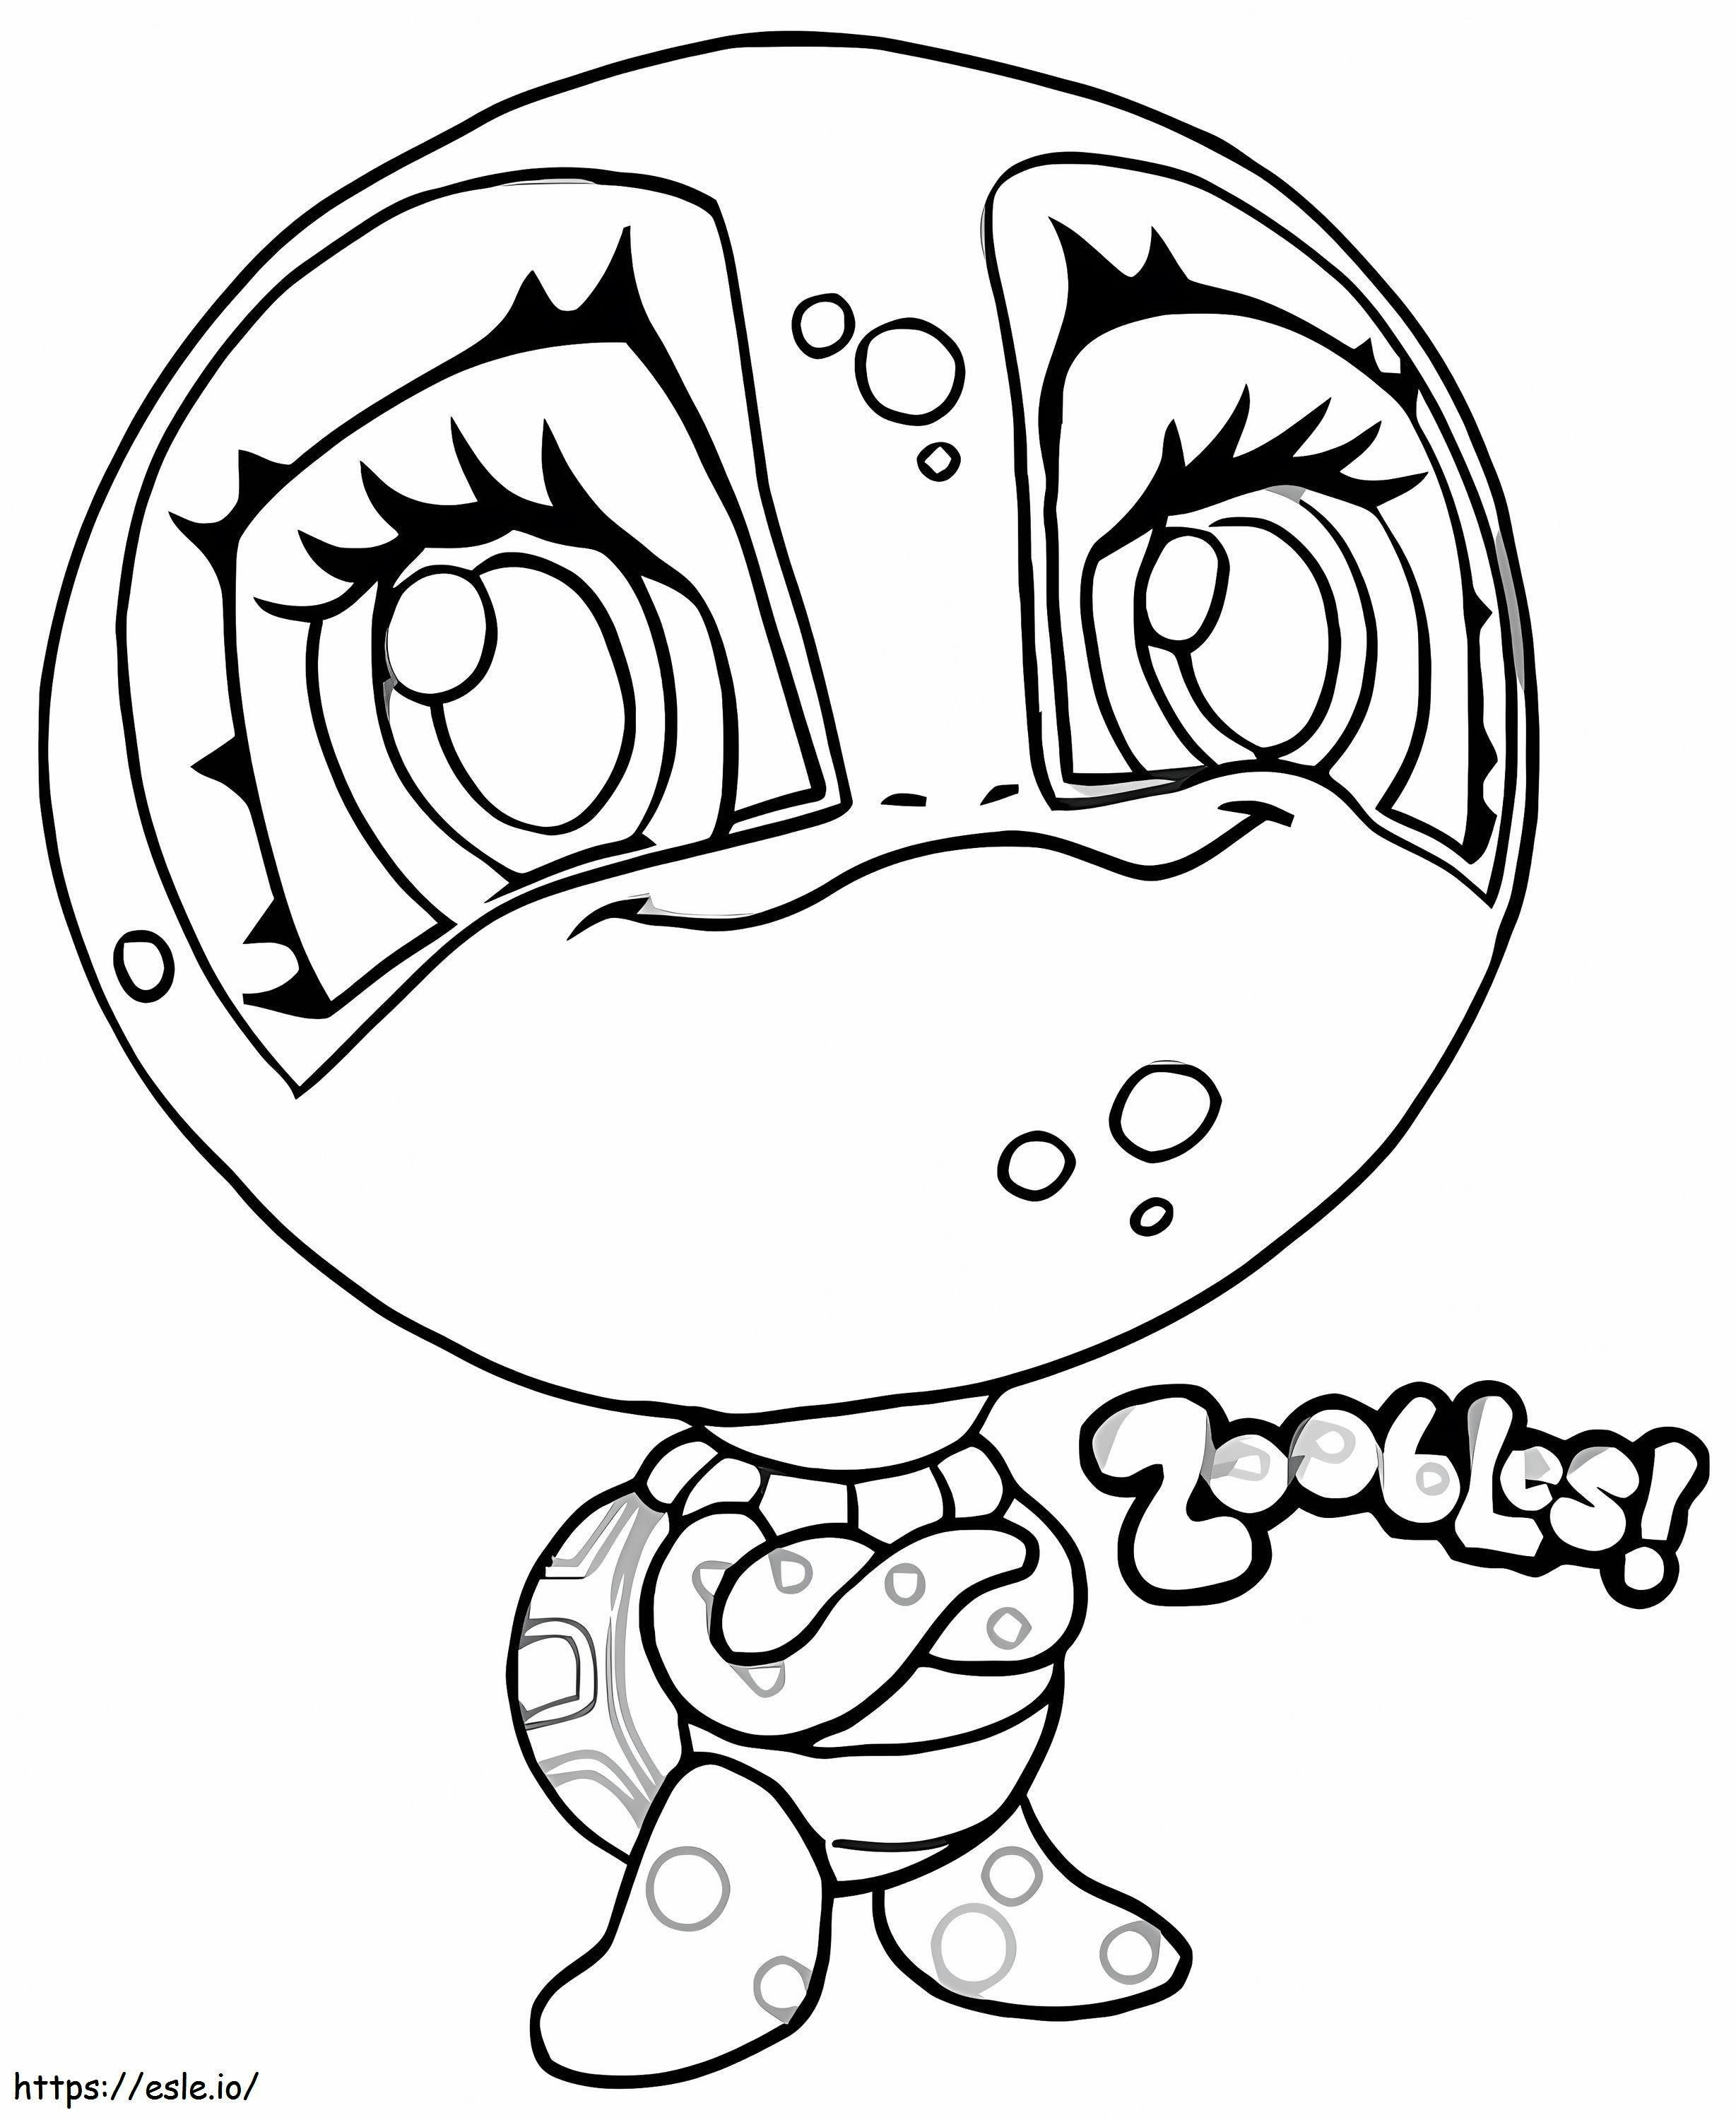 Zoobles Turtle coloring page